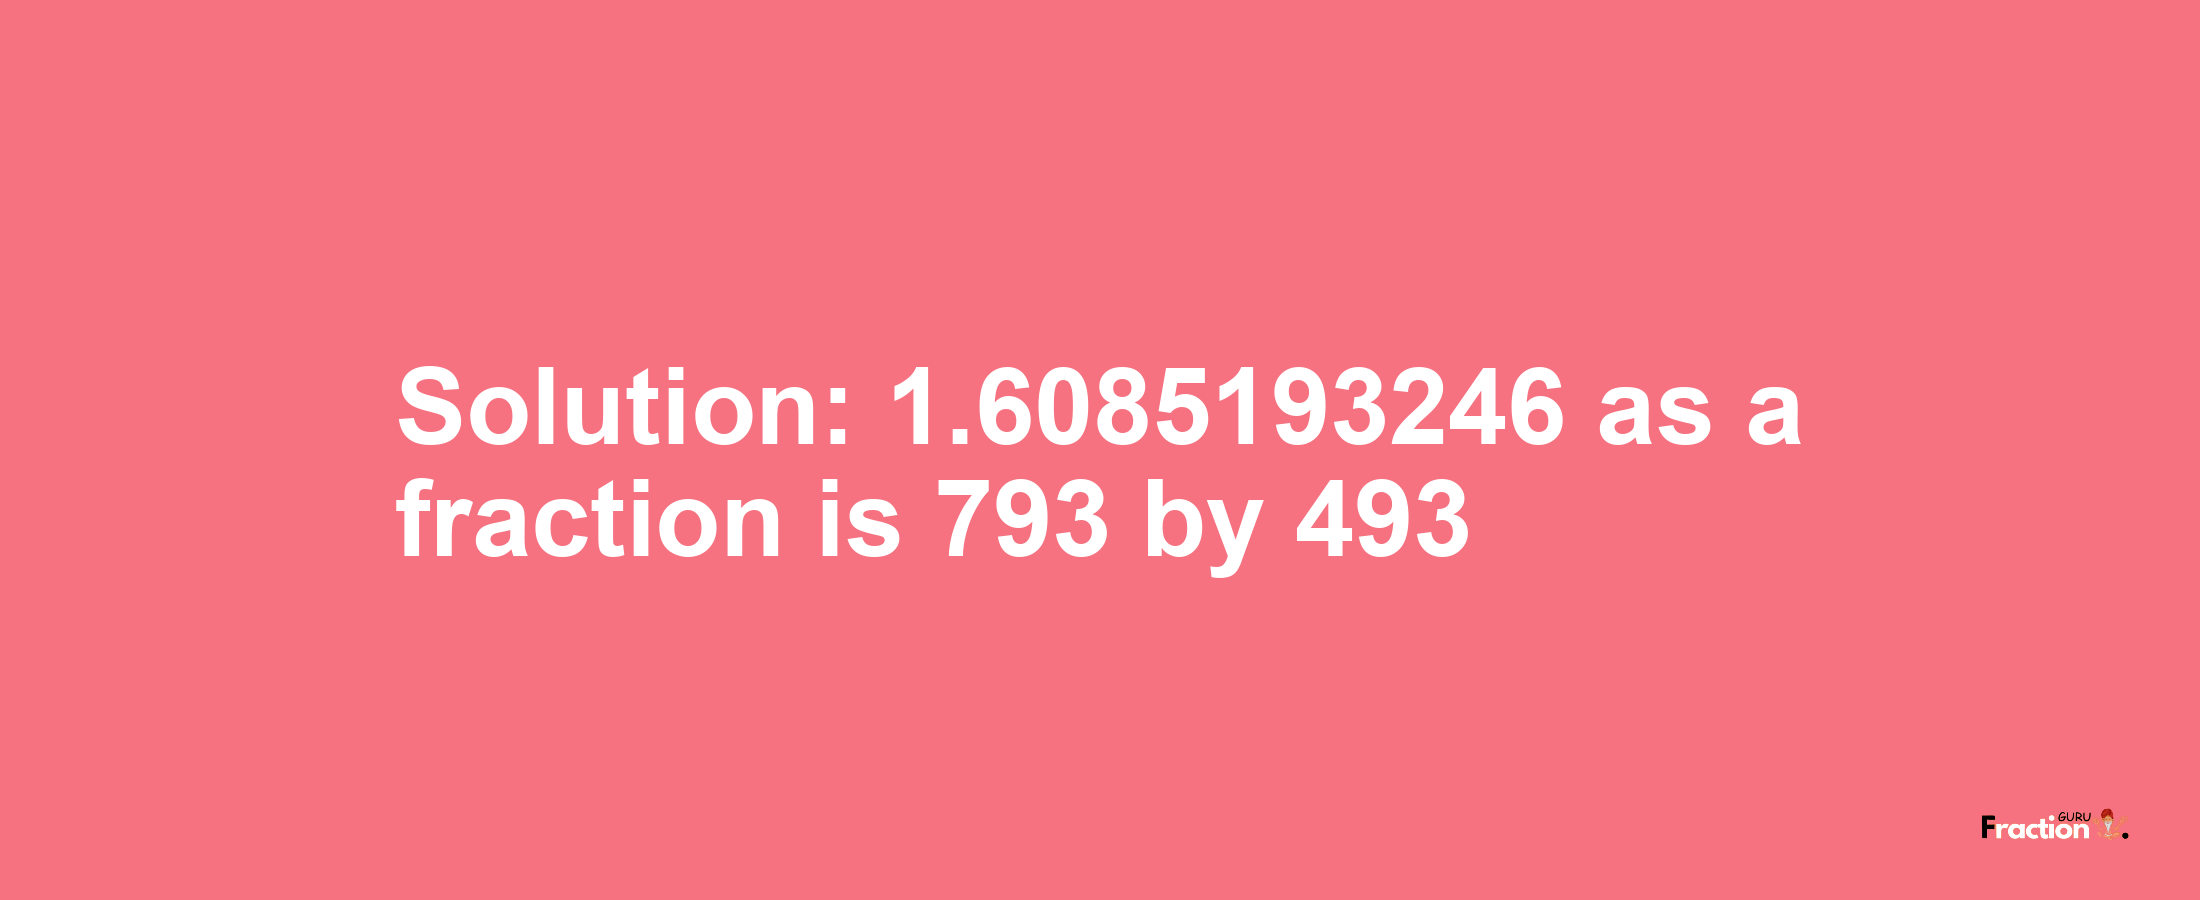 Solution:1.6085193246 as a fraction is 793/493